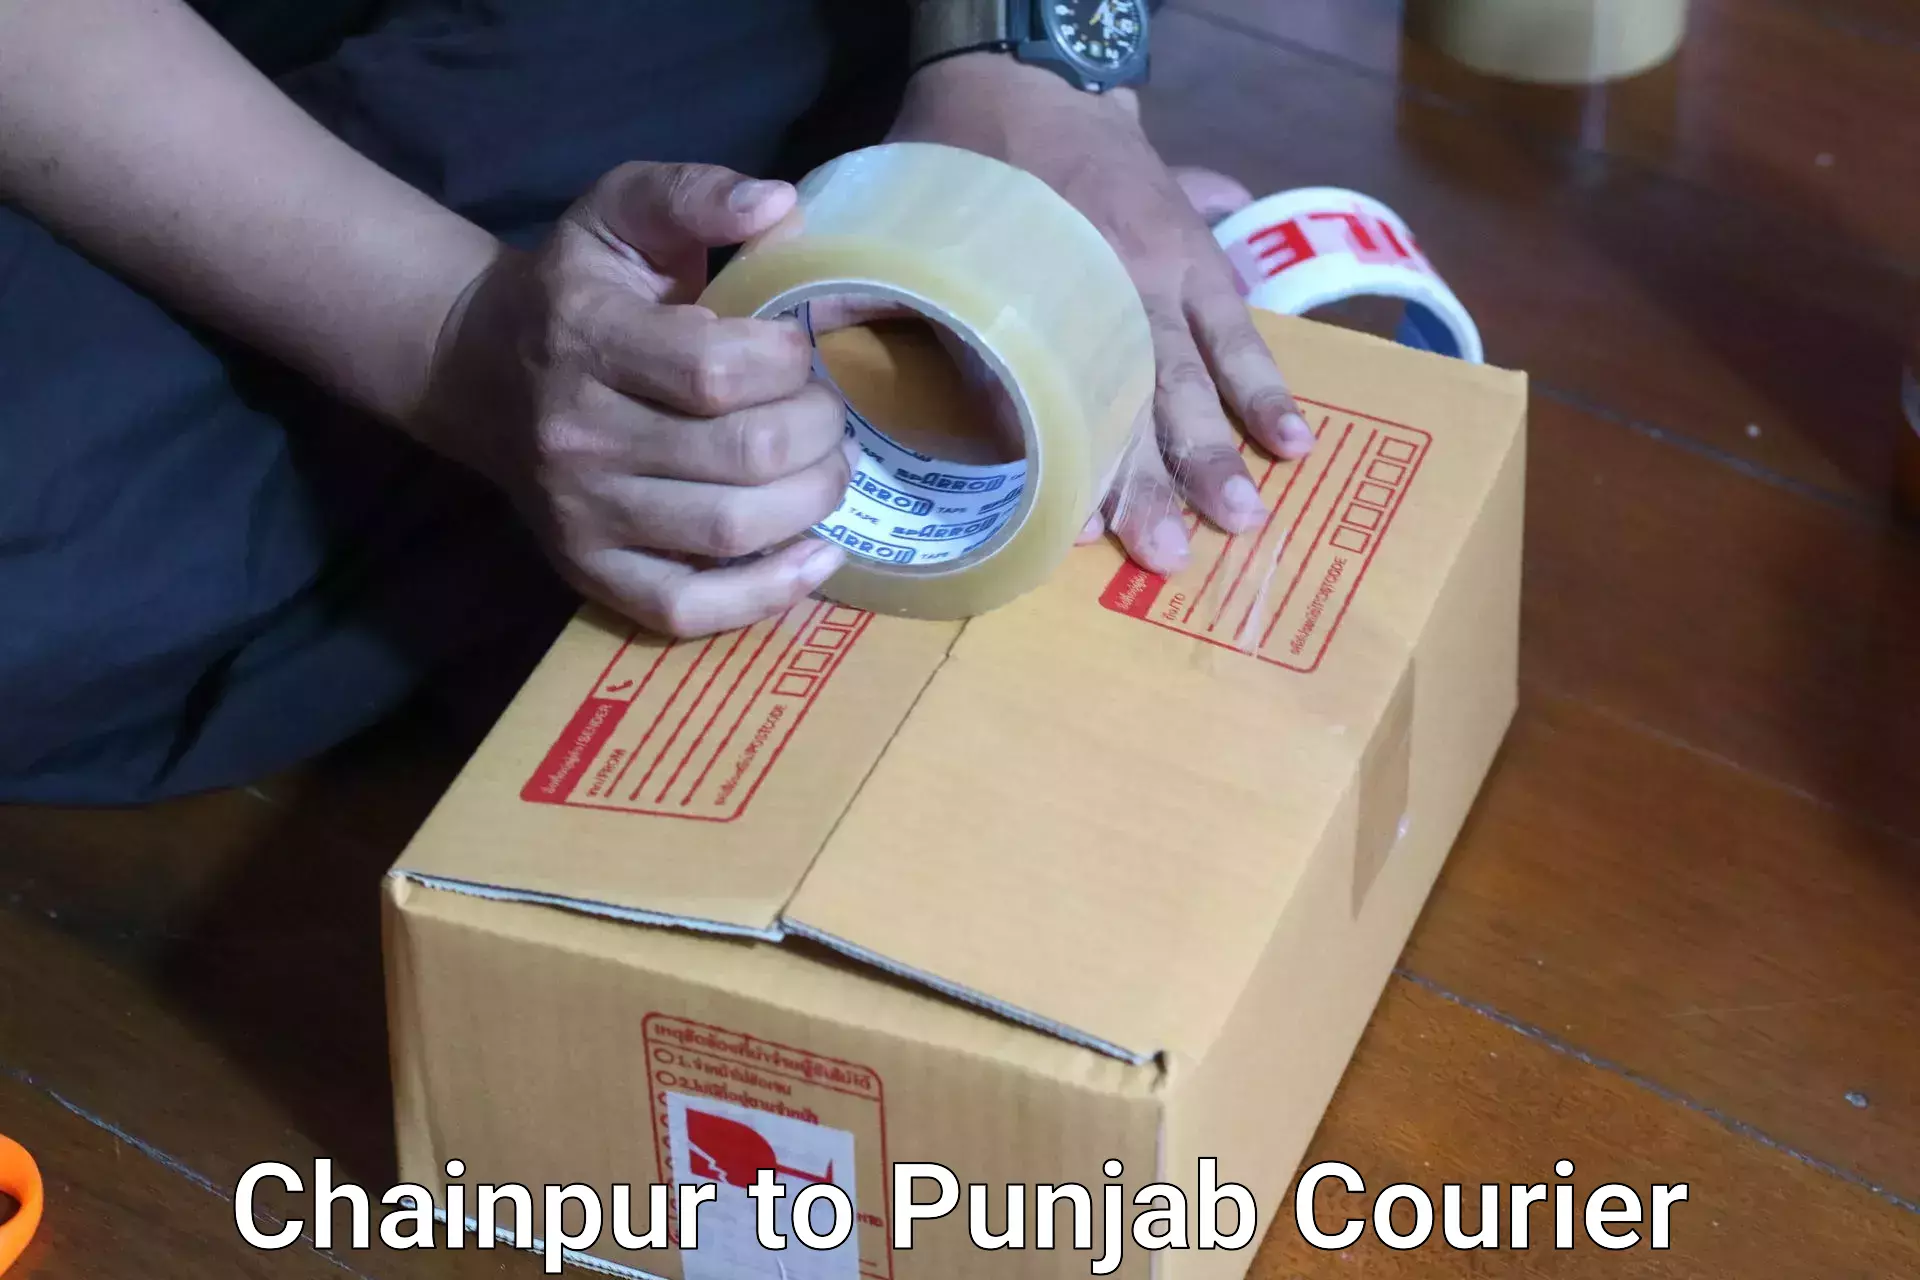 Instant baggage transport quote Chainpur to Mohali